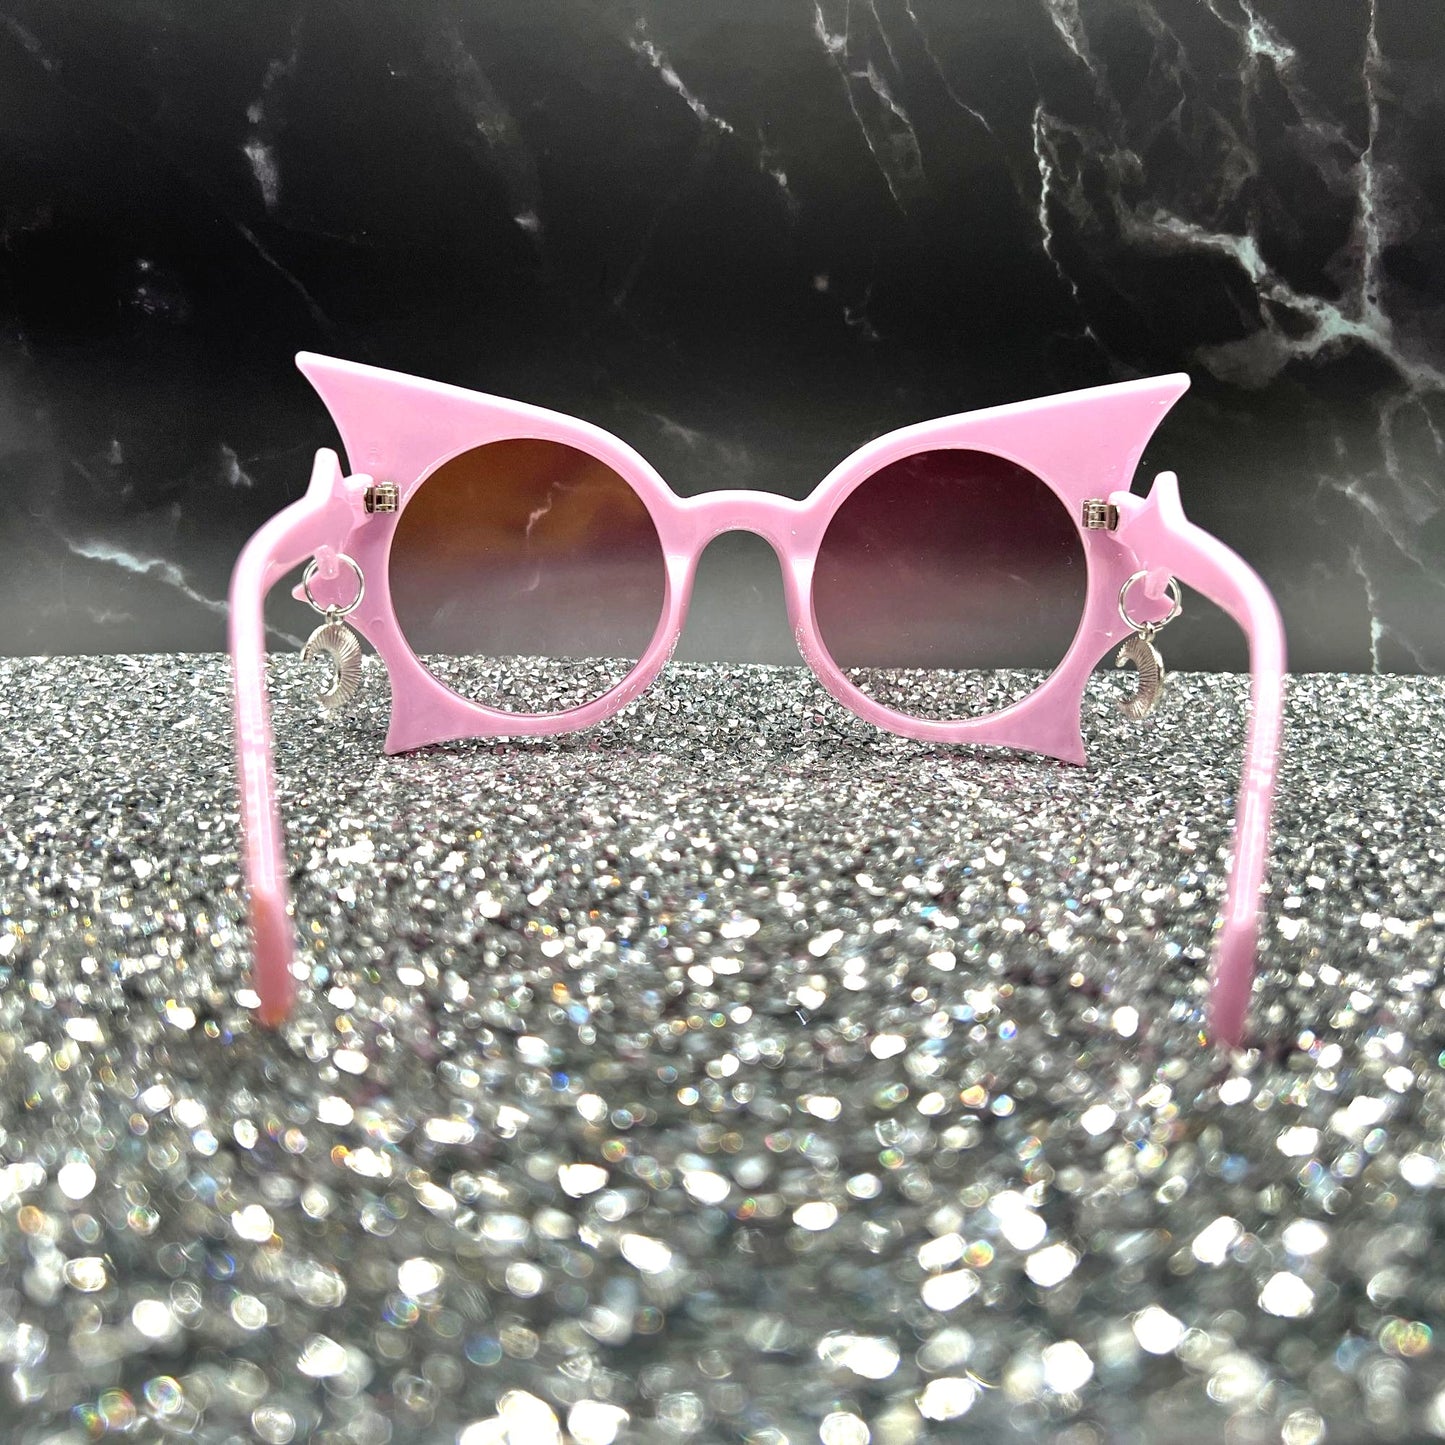 "Pastel pink bat sunglasses with moon charms. Displayed on a glittery table. Back view.